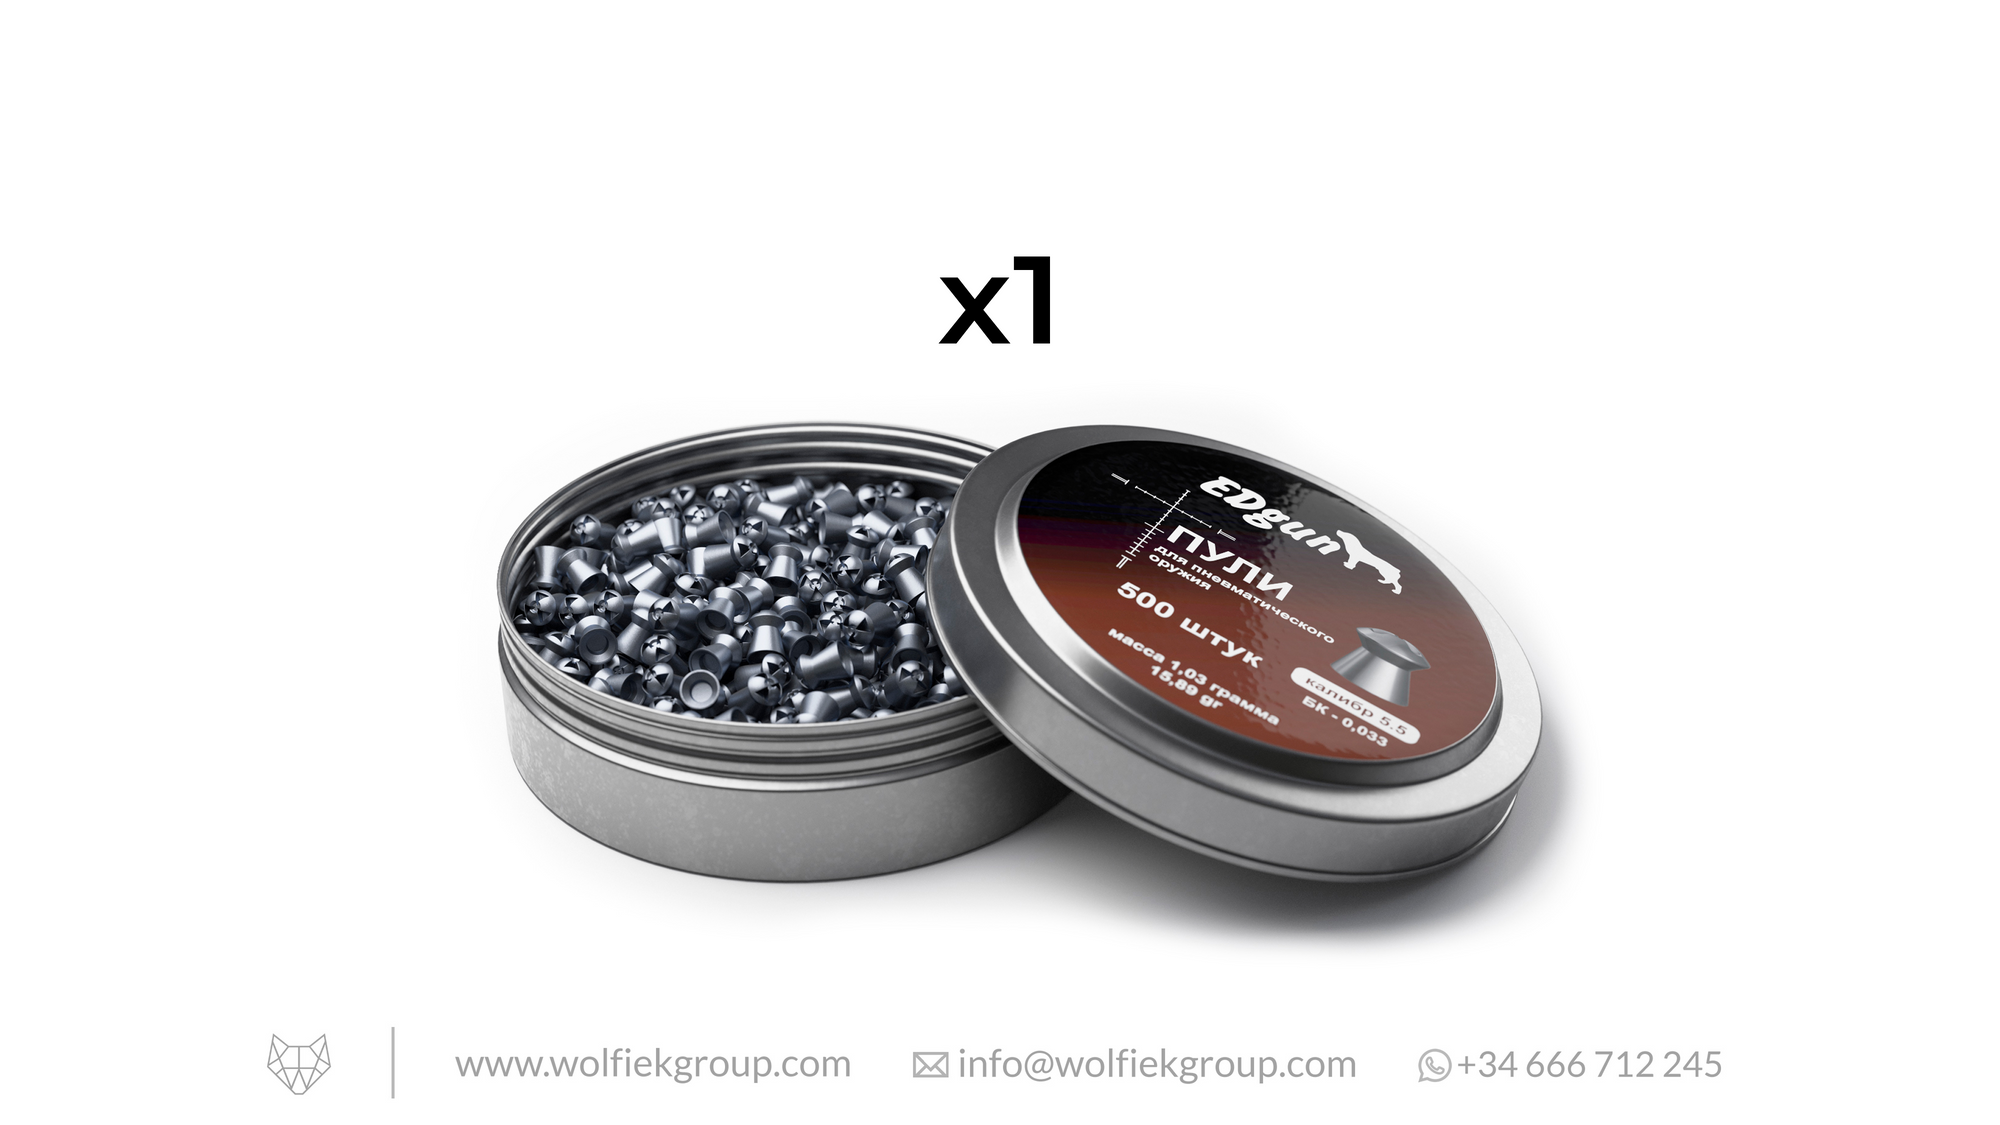 EDgun Hades Pellets Cal .22 (5,52mm) Weight 1,03g (15,89gr) with text buy 4 get 1 for free